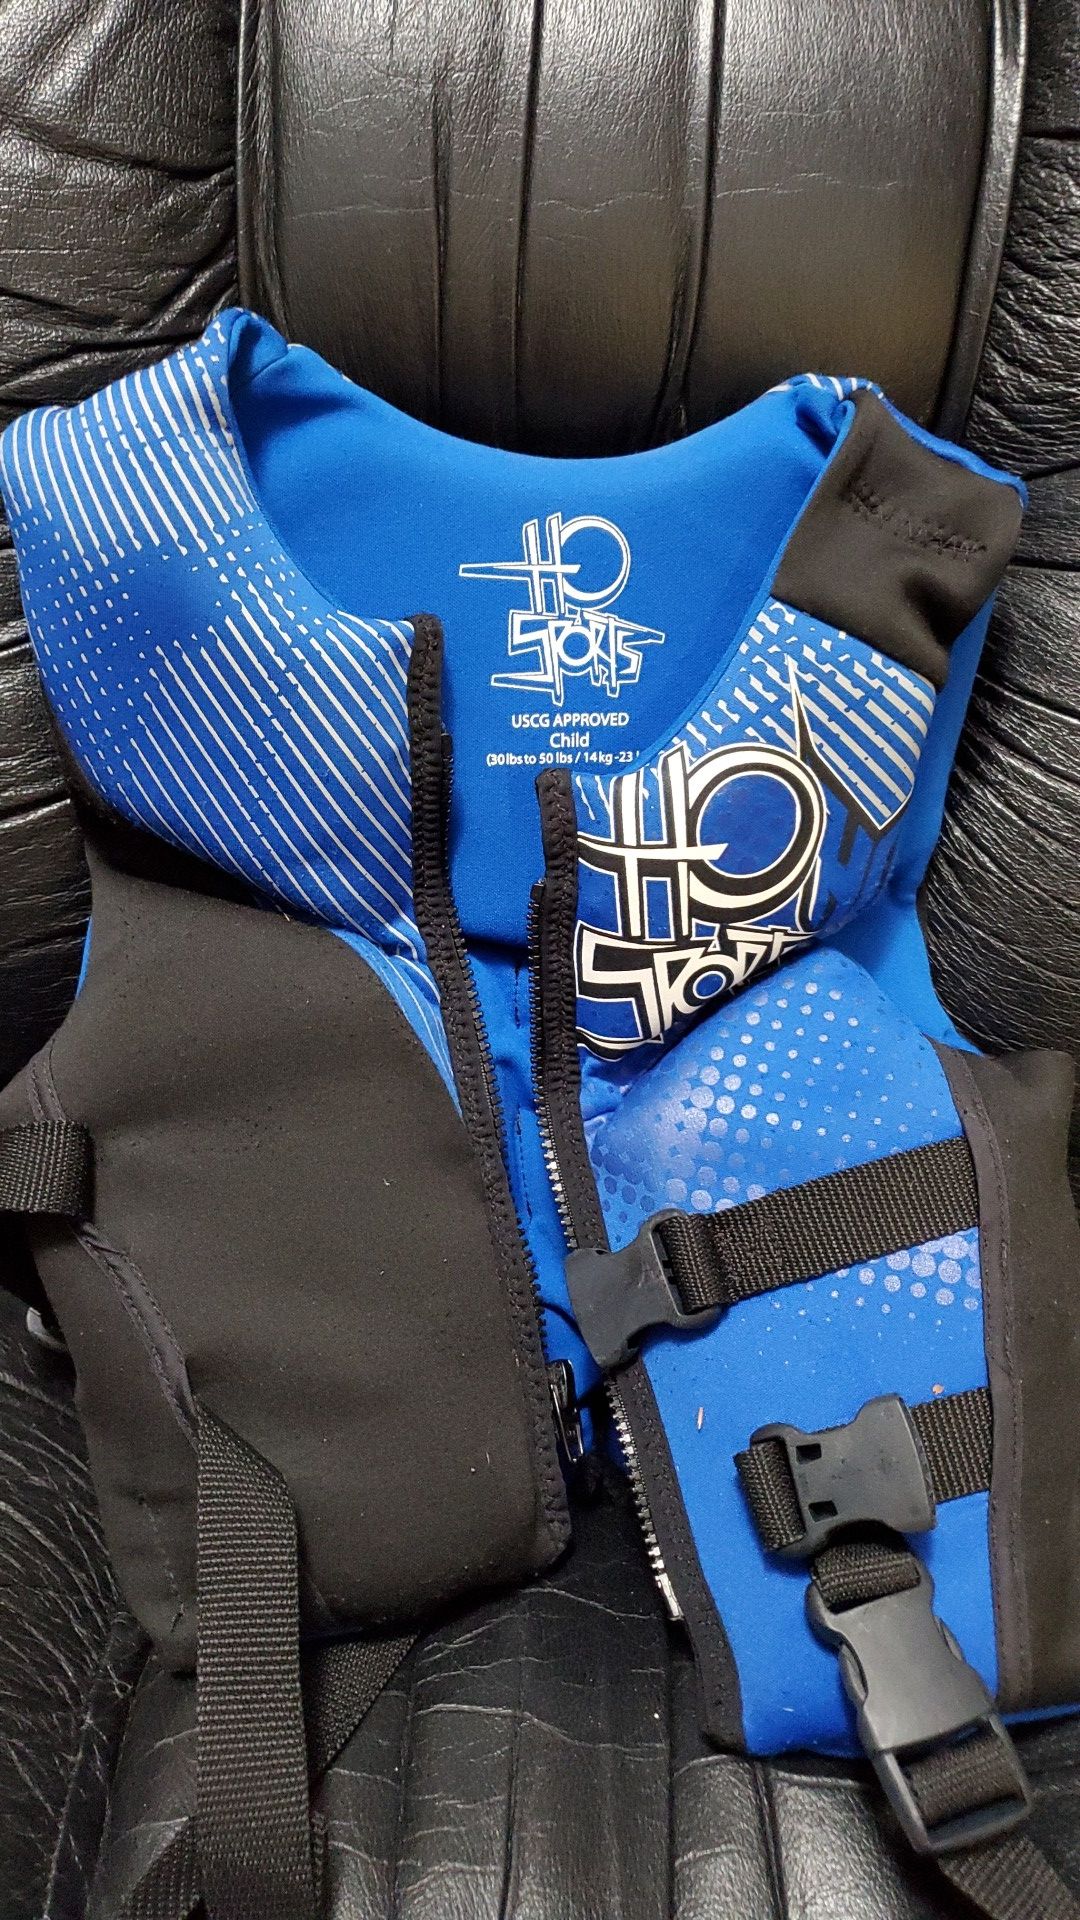 Free Life jacket 30 to 50 pound for child and swim board